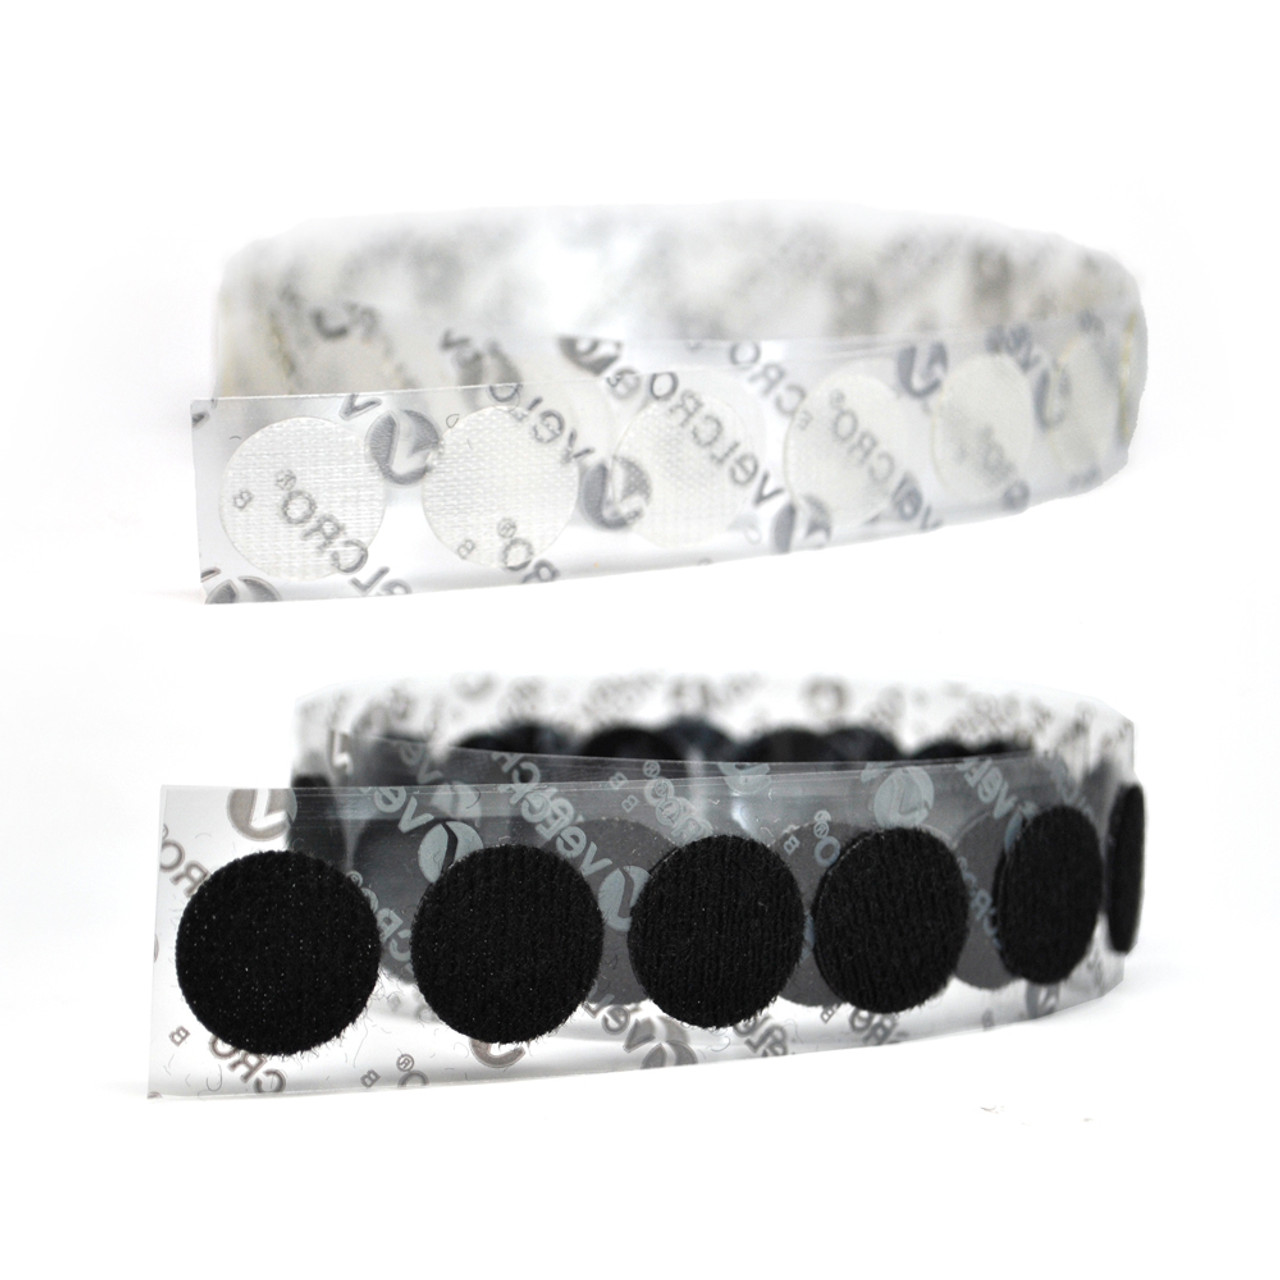 VELCRO® Brand Low Profile Circles On A Roll Clear and Black / Thin Velcro - Low Profile Velcro